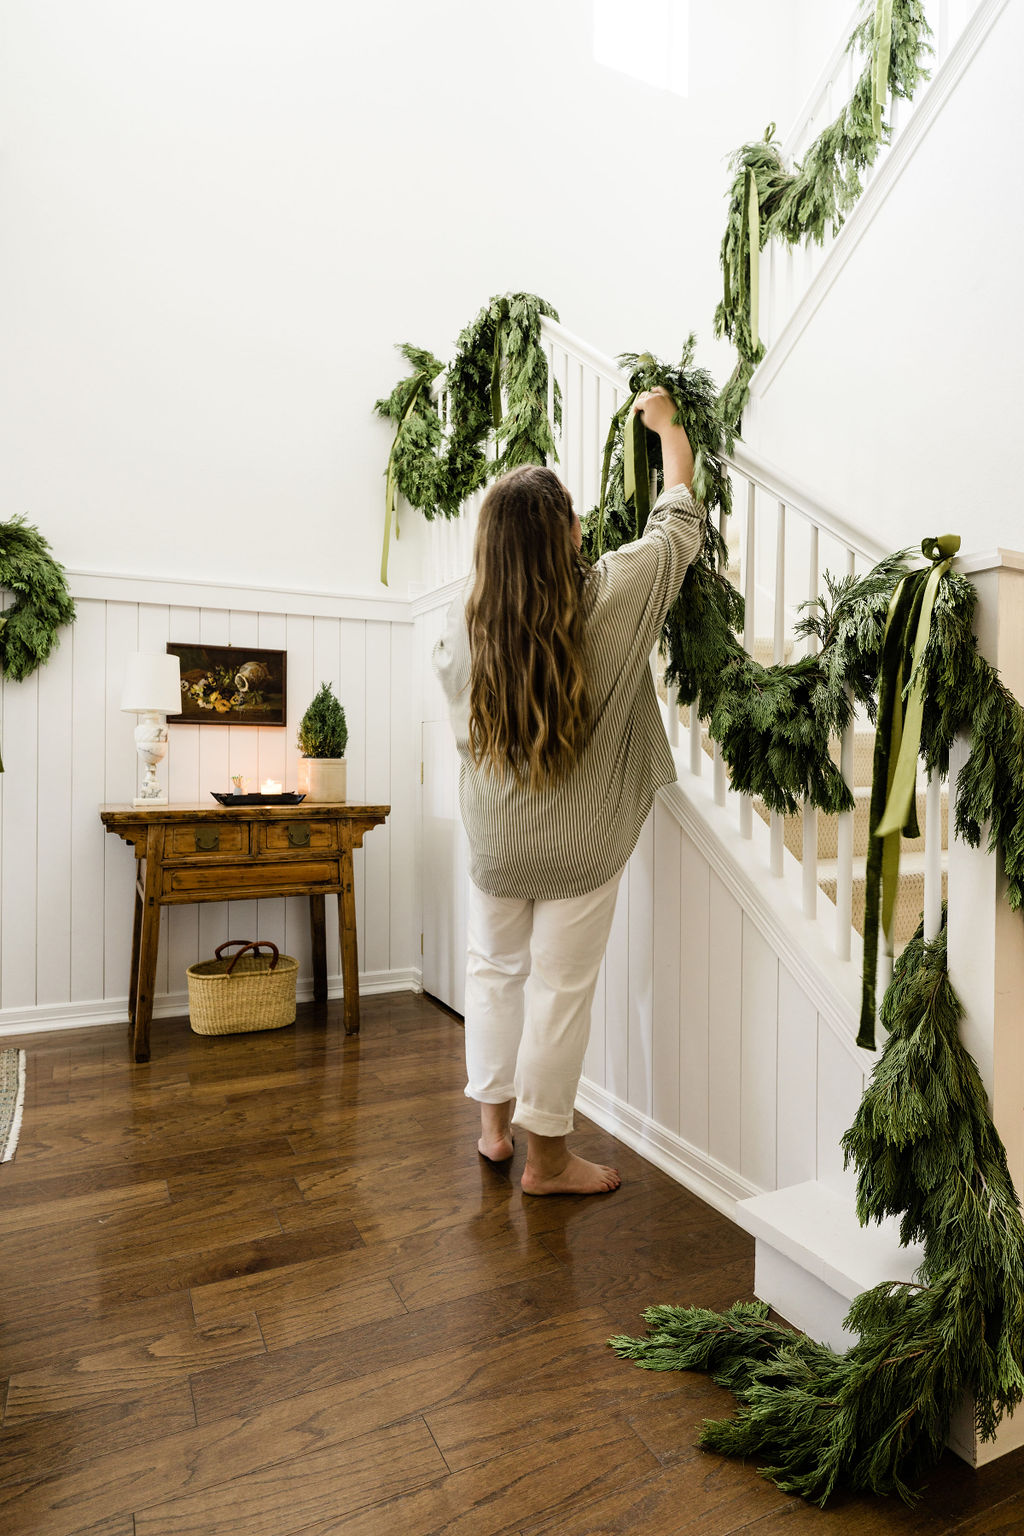 fresh cypress garland garnished with green ribbons decorating the entryway for Christmas